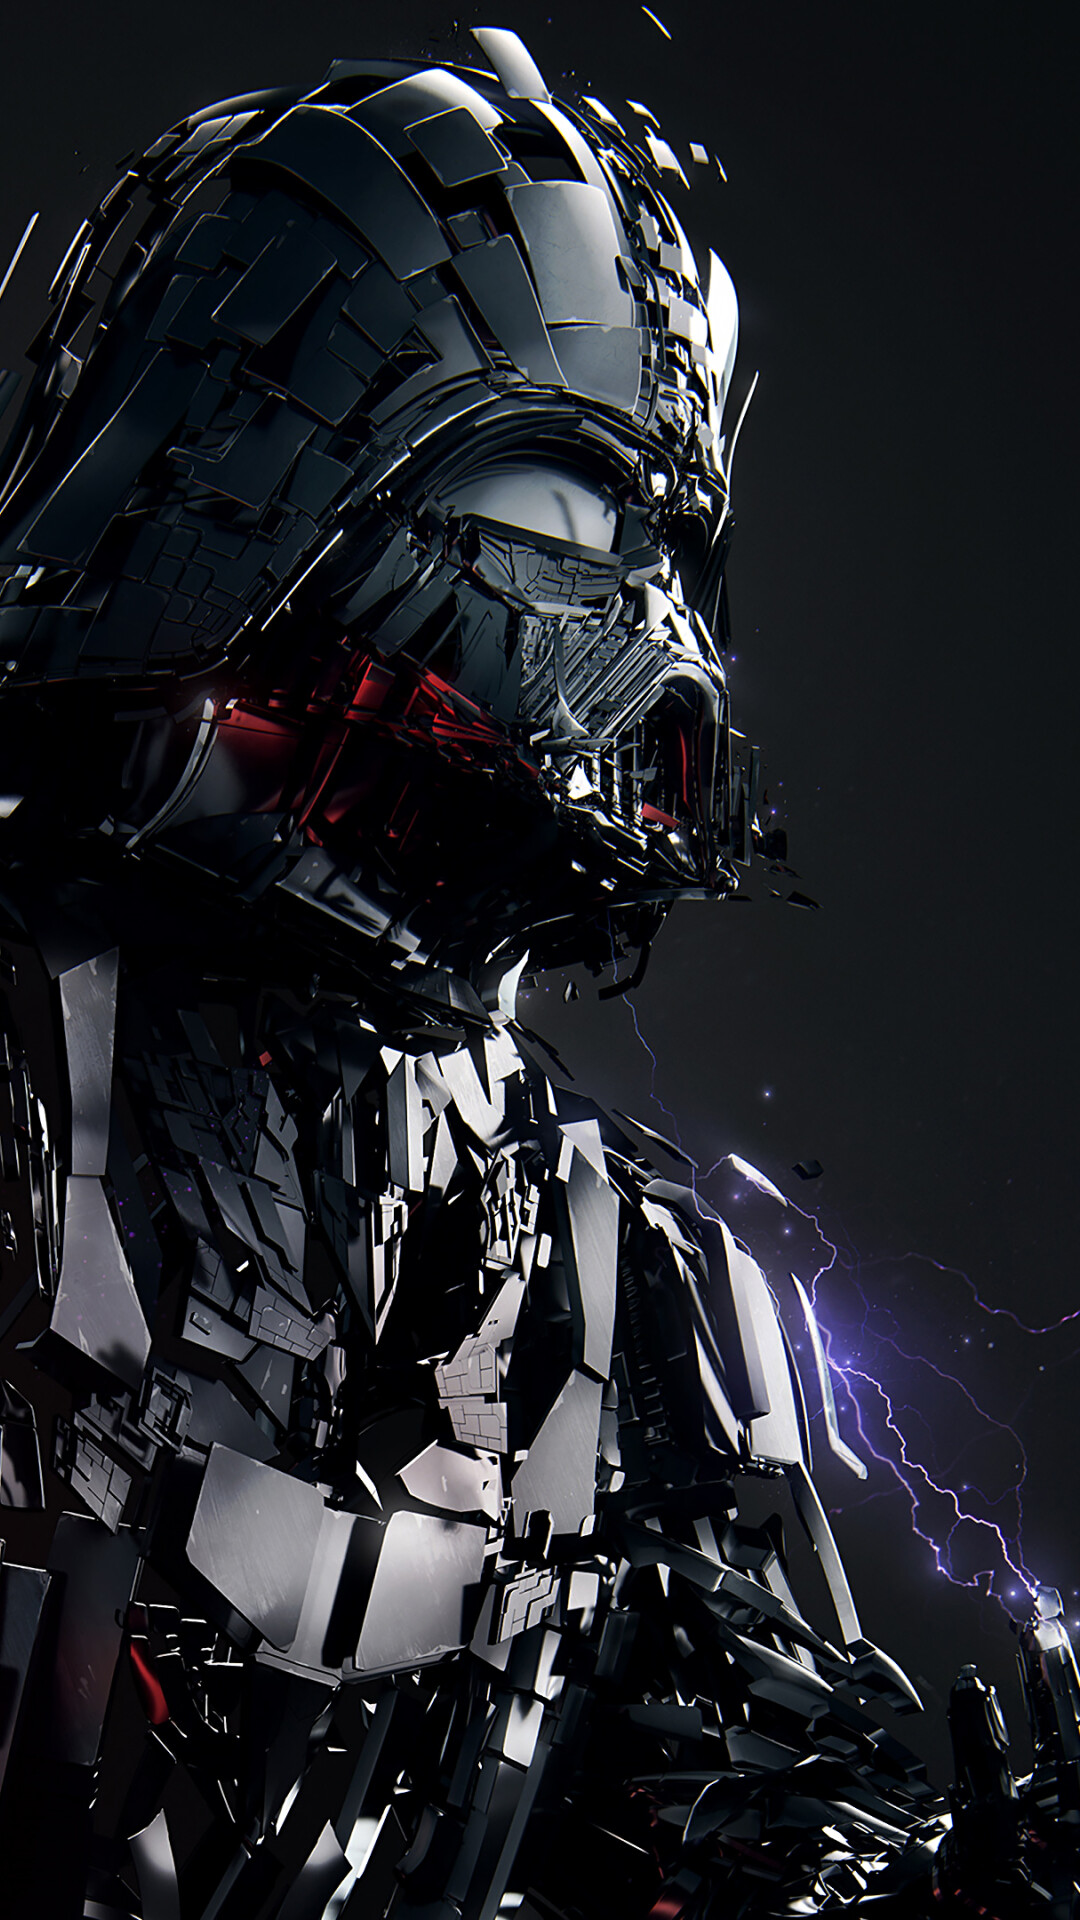 Star Wars: Darth Vader, A lead villain in the science fiction franchise. 1080x1920 Full HD Wallpaper.